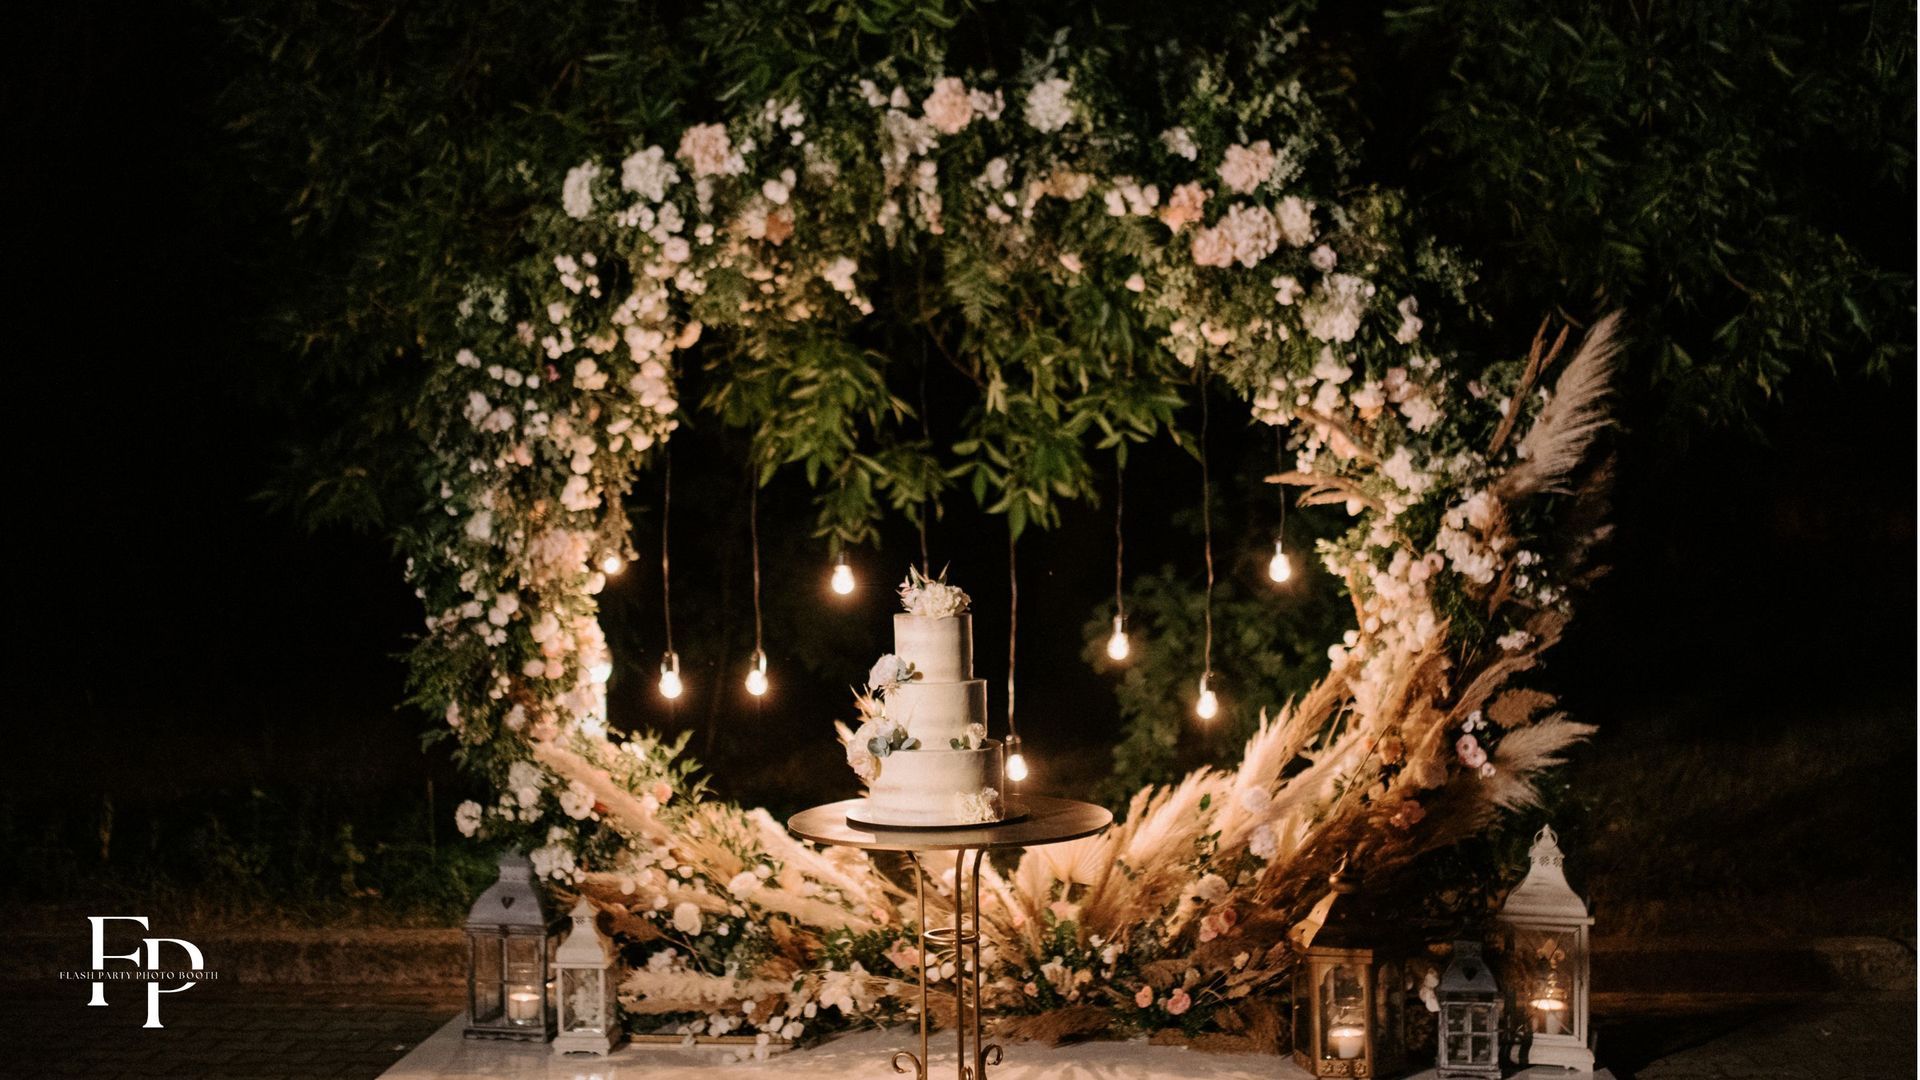 A wedding cake at the center of the wedding destination venue surrounded by a flower arrangement